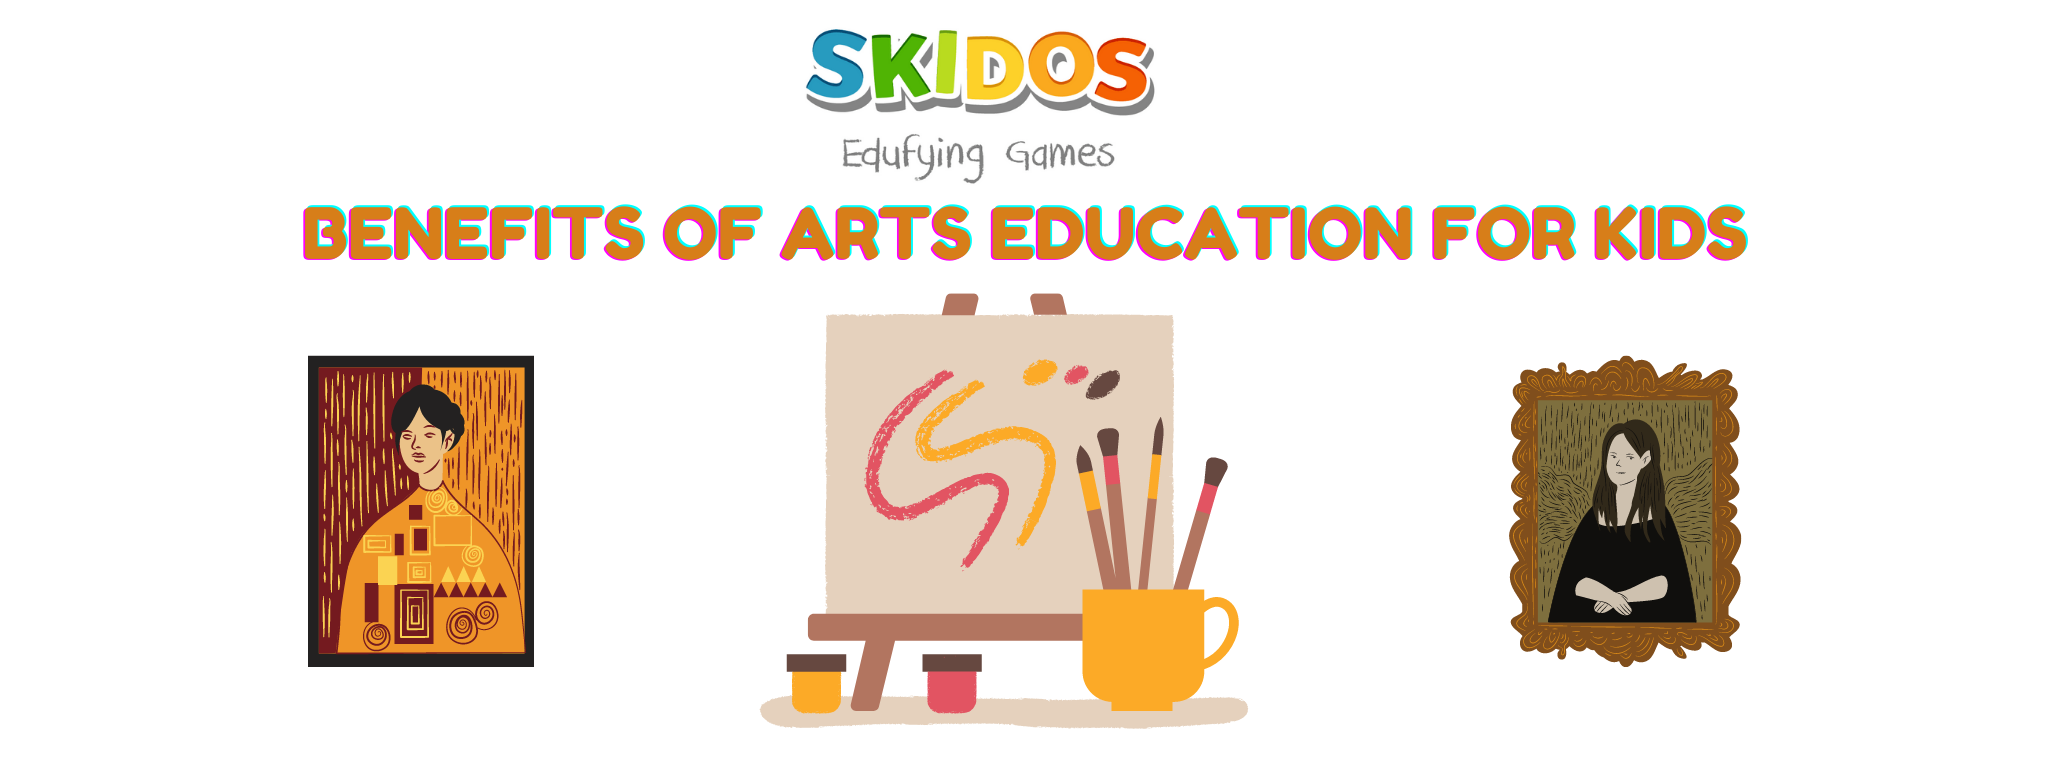 Benefits of arts education for kids, children, students